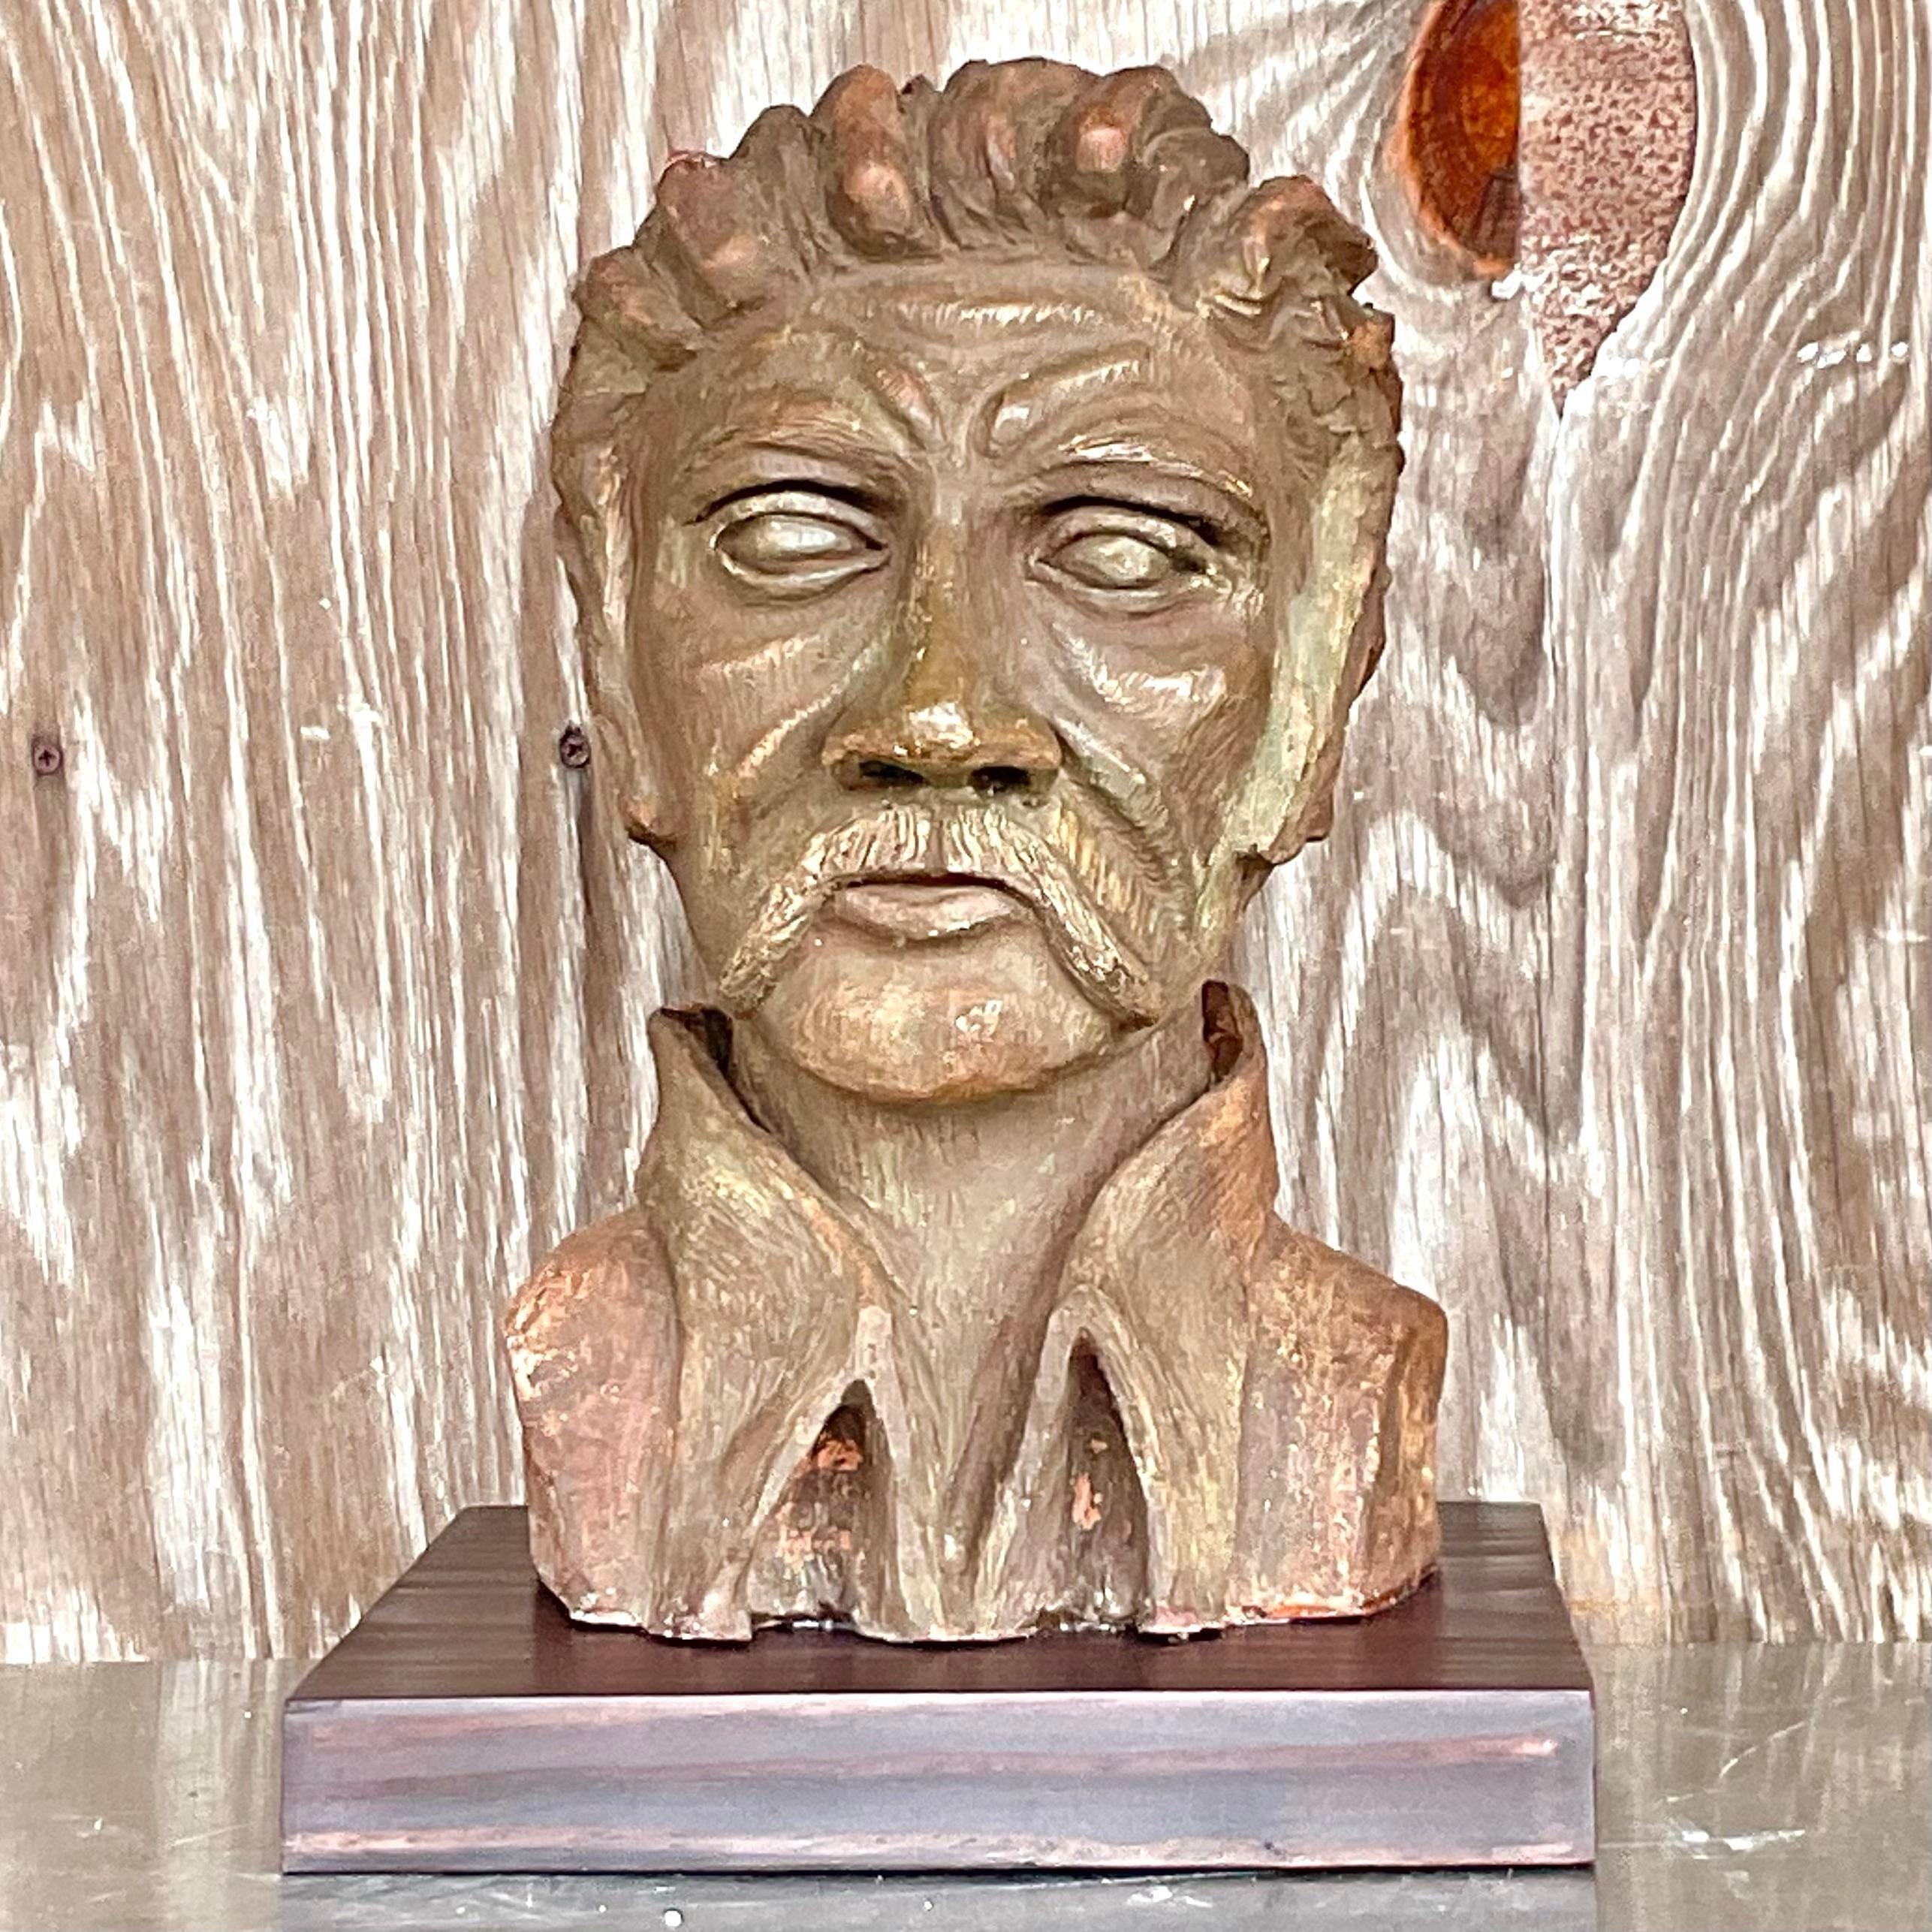 Embrace the artistic legacy of American craftsmanship with this Vintage Boho Sculpted Clay Bust of Man. With its intricate detailing and Bohemian charm, this piece captures the essence of both creativity and heritage. Add a touch of cultural flair